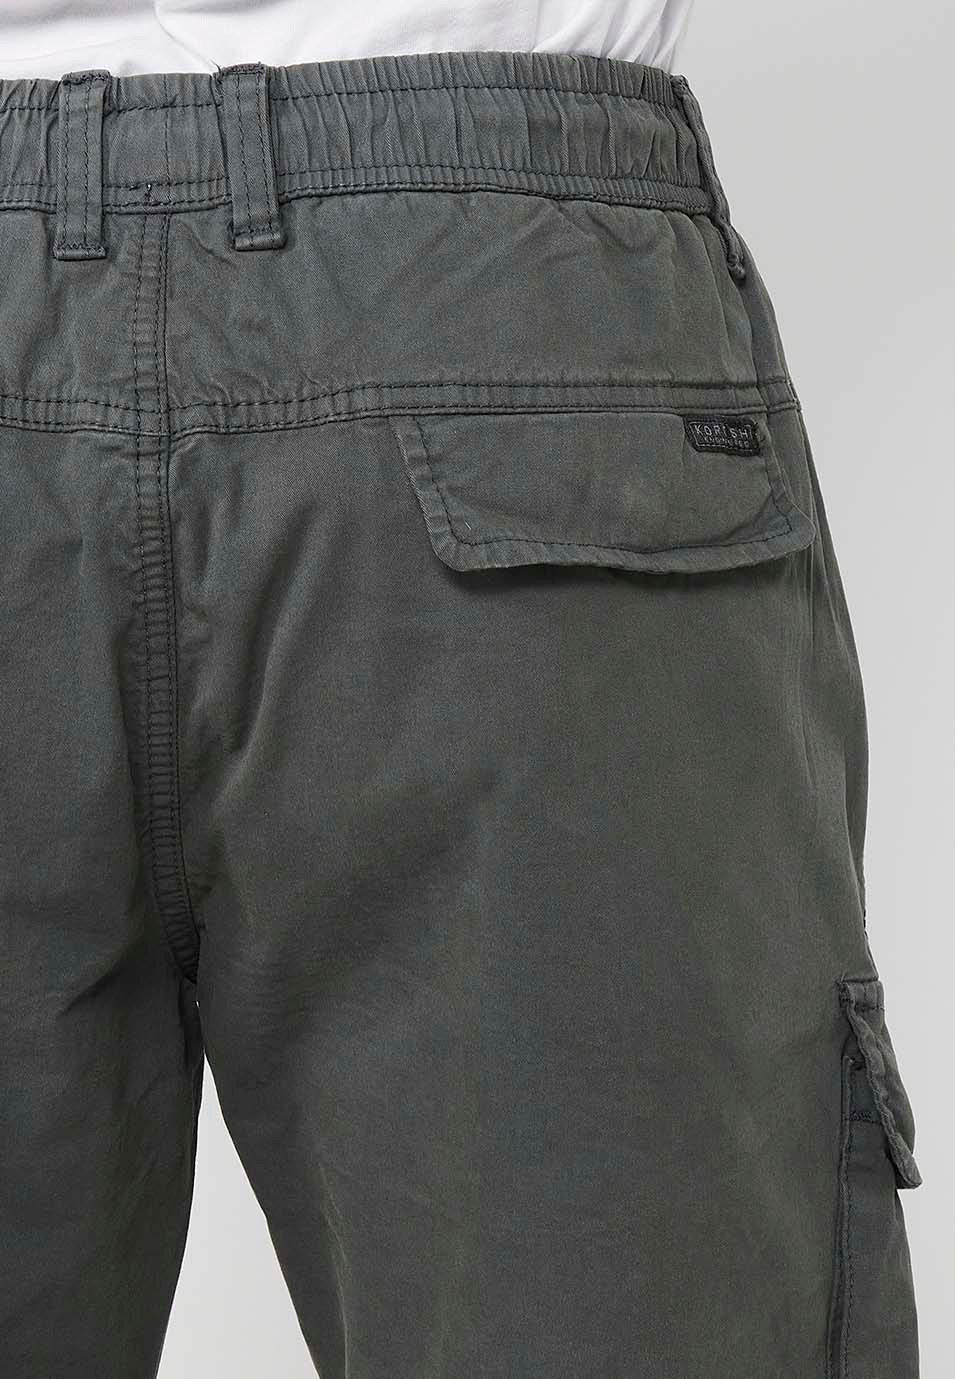 Cargo shorts with side pockets with flap and front closure with zipper and button Color Gray for Men 8